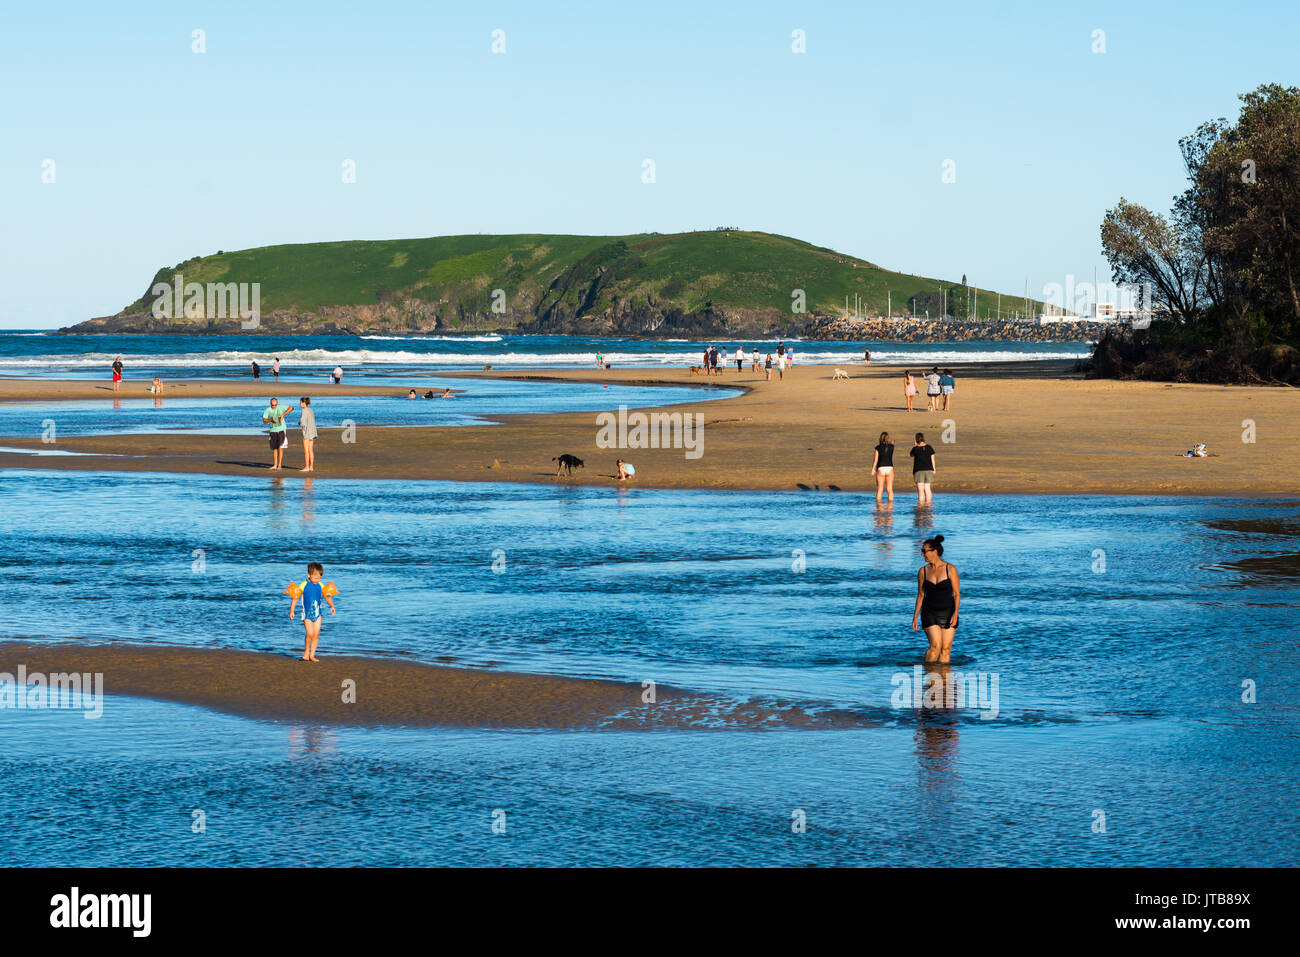 Coffs Creek reaches the sea at Park Beach resort with Mutton Bird Island to the rear, Coffs Harbour, New South Wales, Australia. Stock Photo